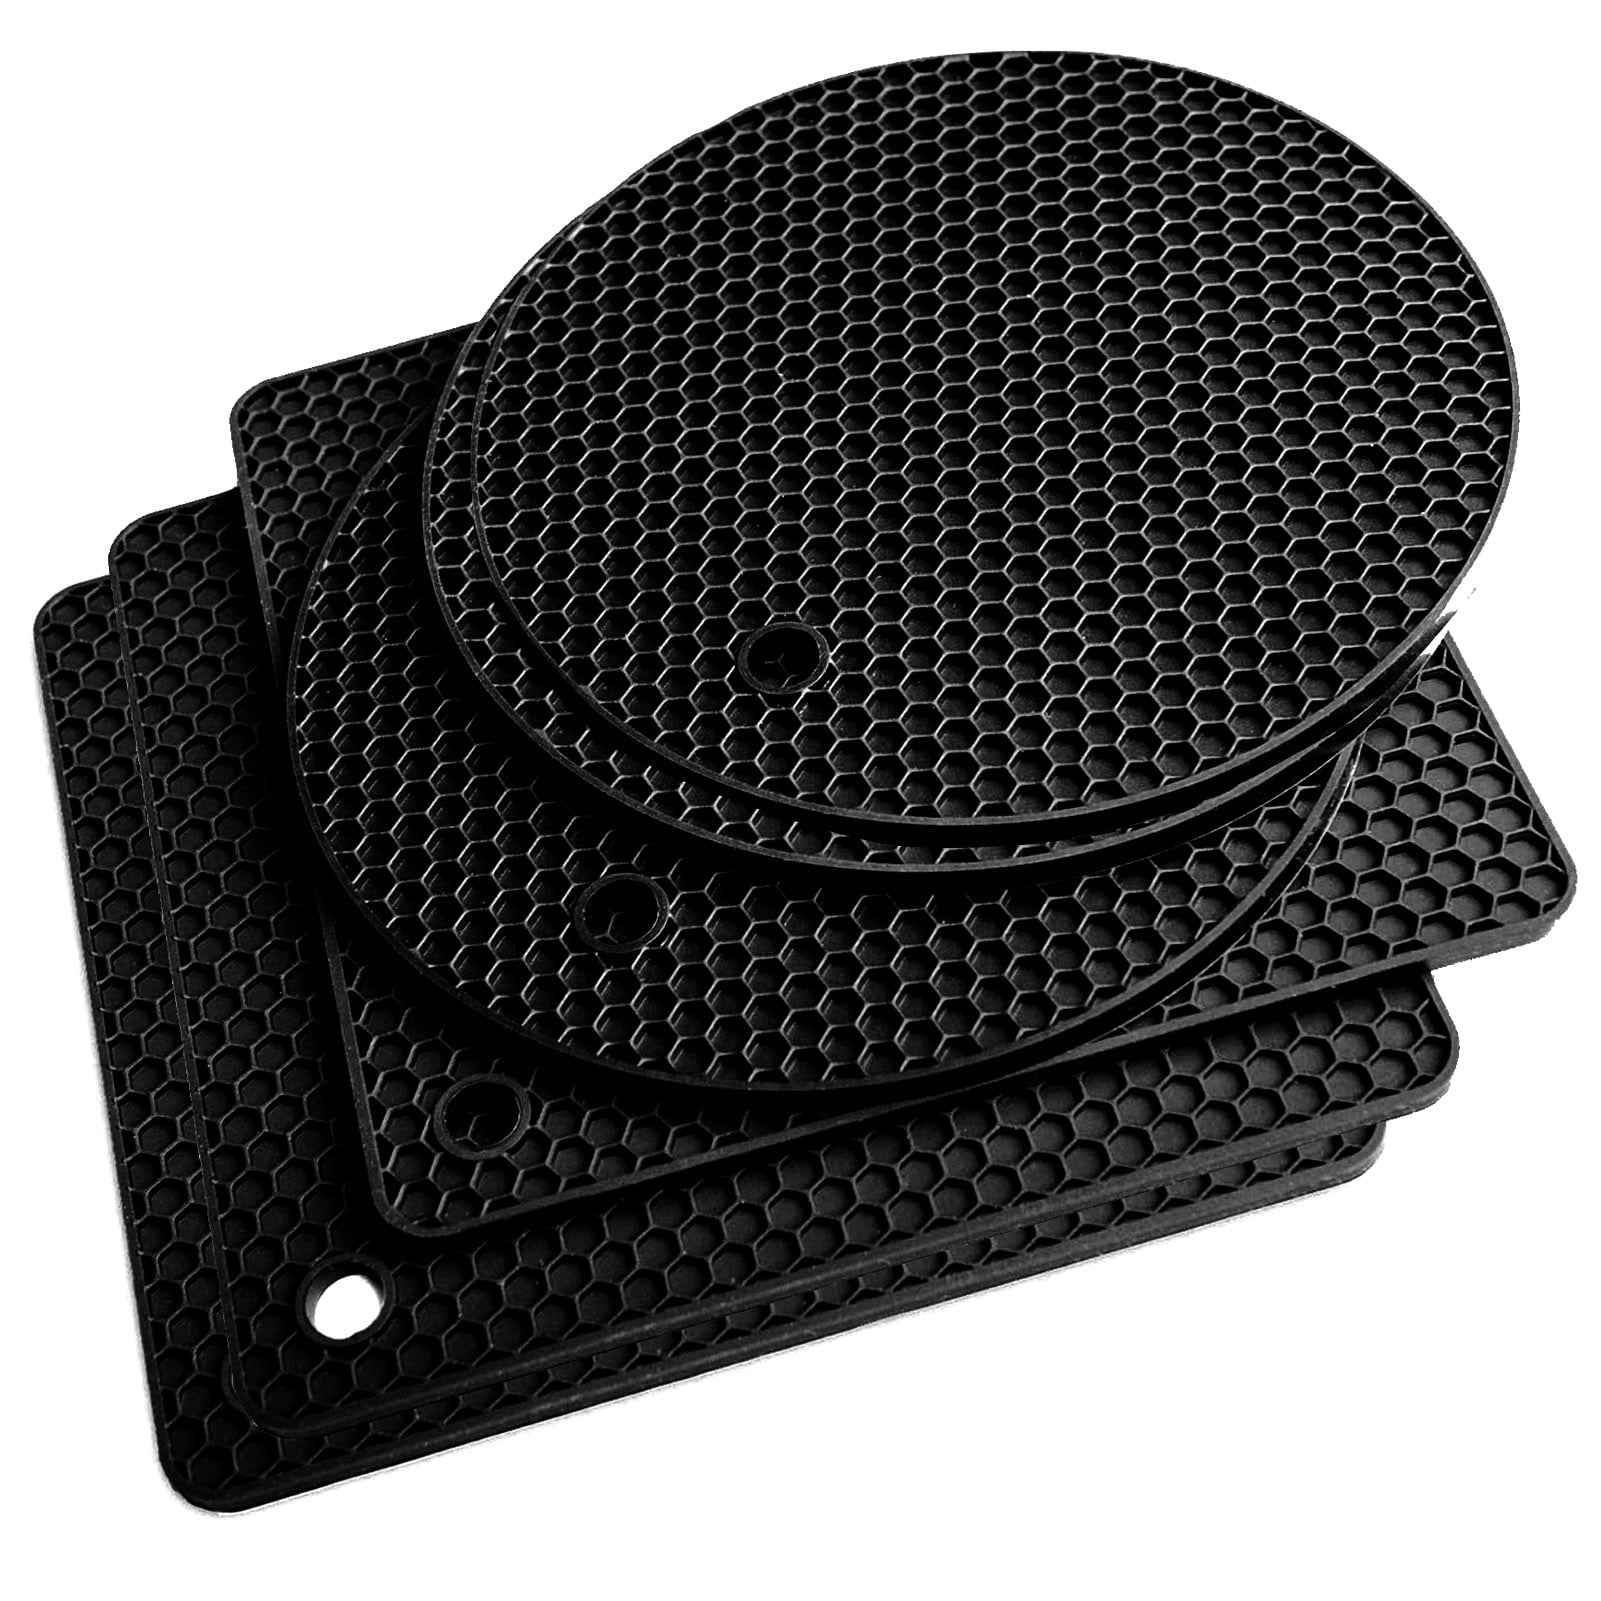 Yesbay Kitchen Silicone Heat Resistant Table Mat Non slip Pot Pan Holder  Pad Cushion